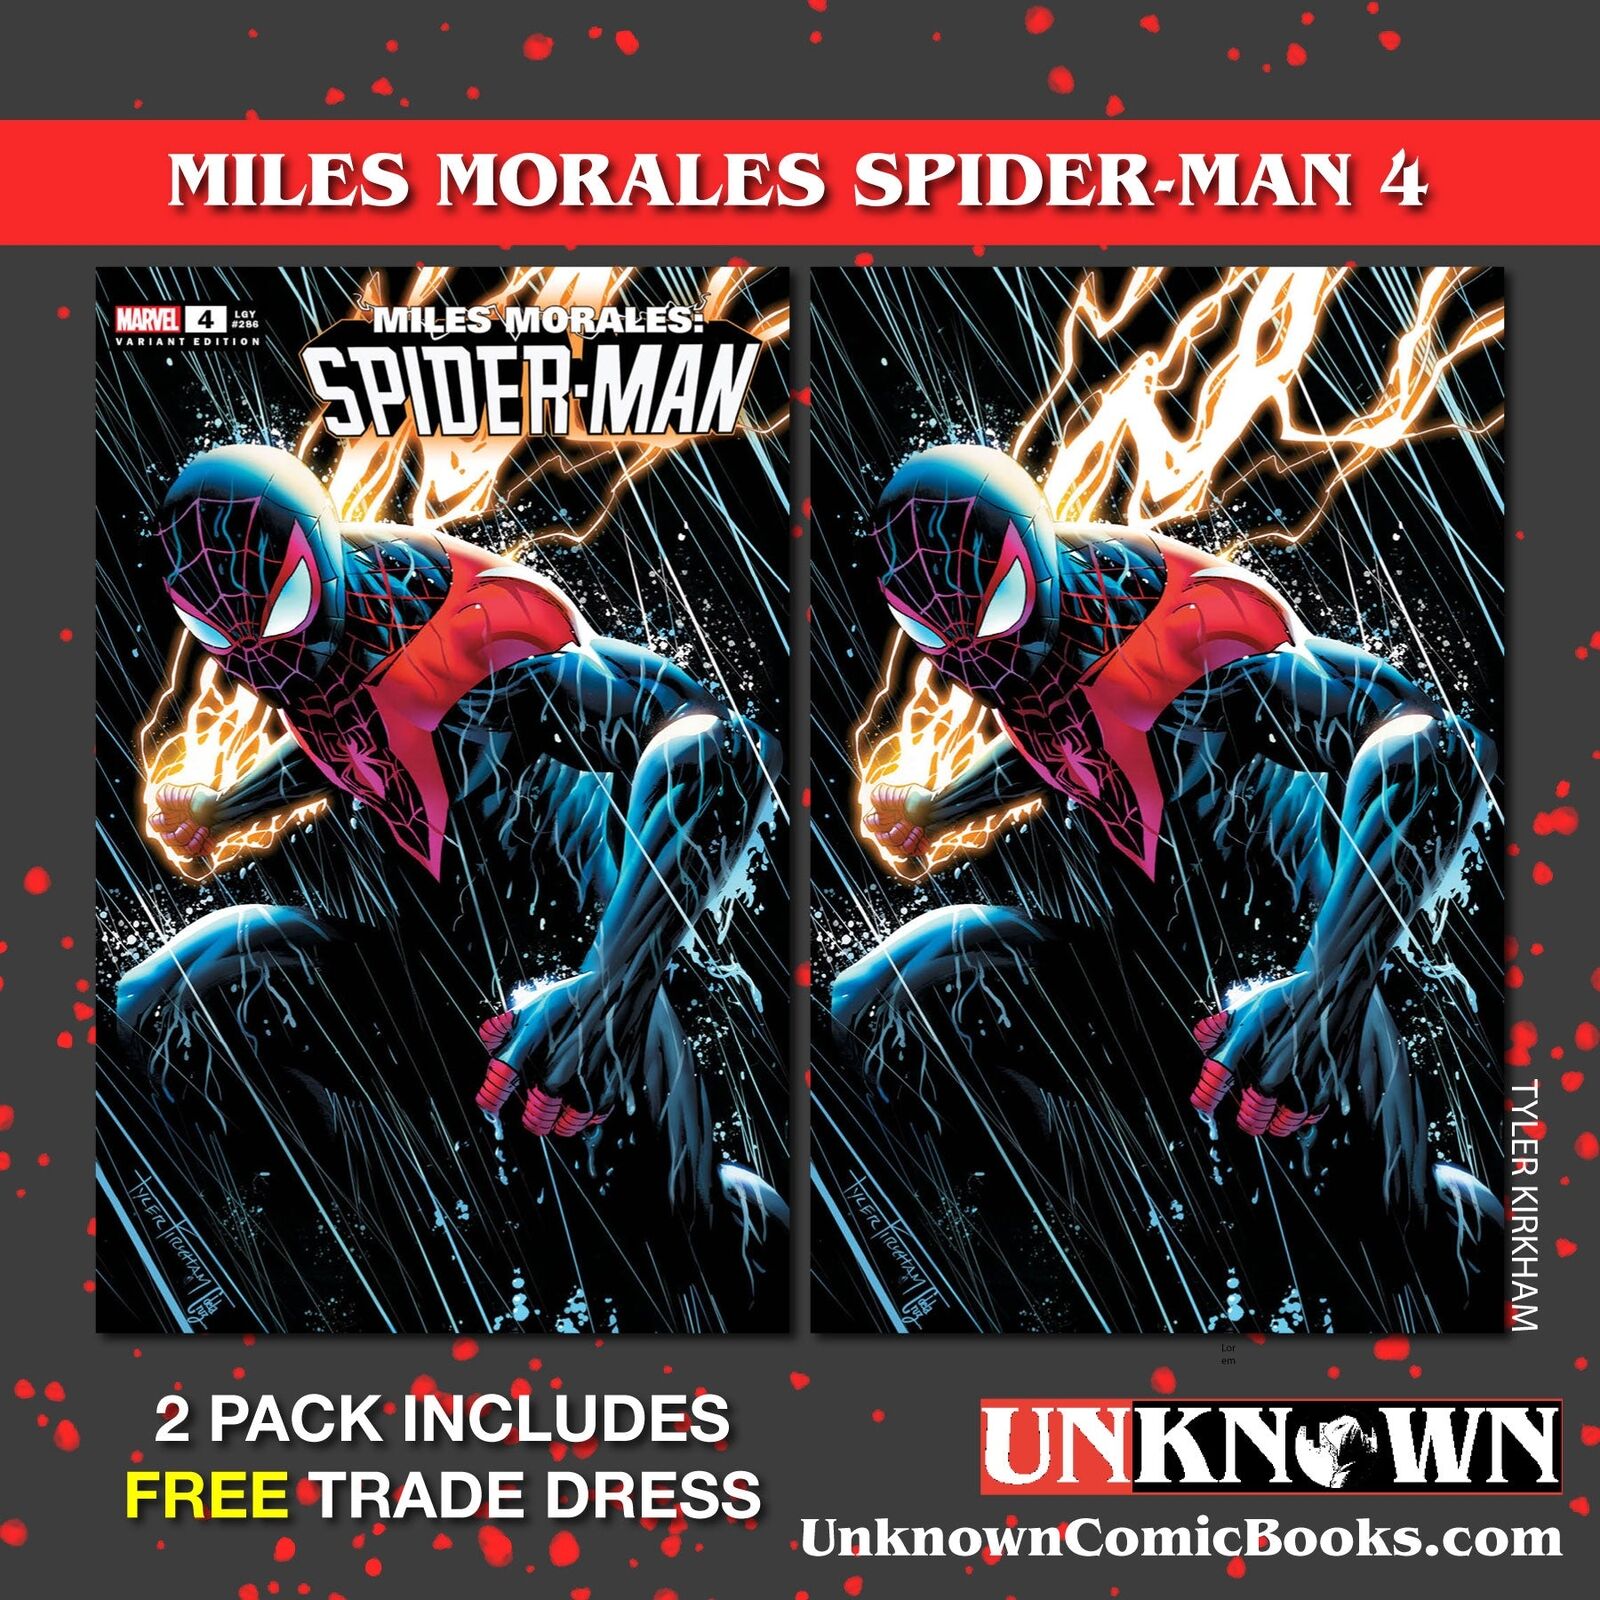 [2 PACK] **FREE TRADE DRESS** MILES MORALES: SPIDER-MAN #4 UNKNOWN COMICS TYLER